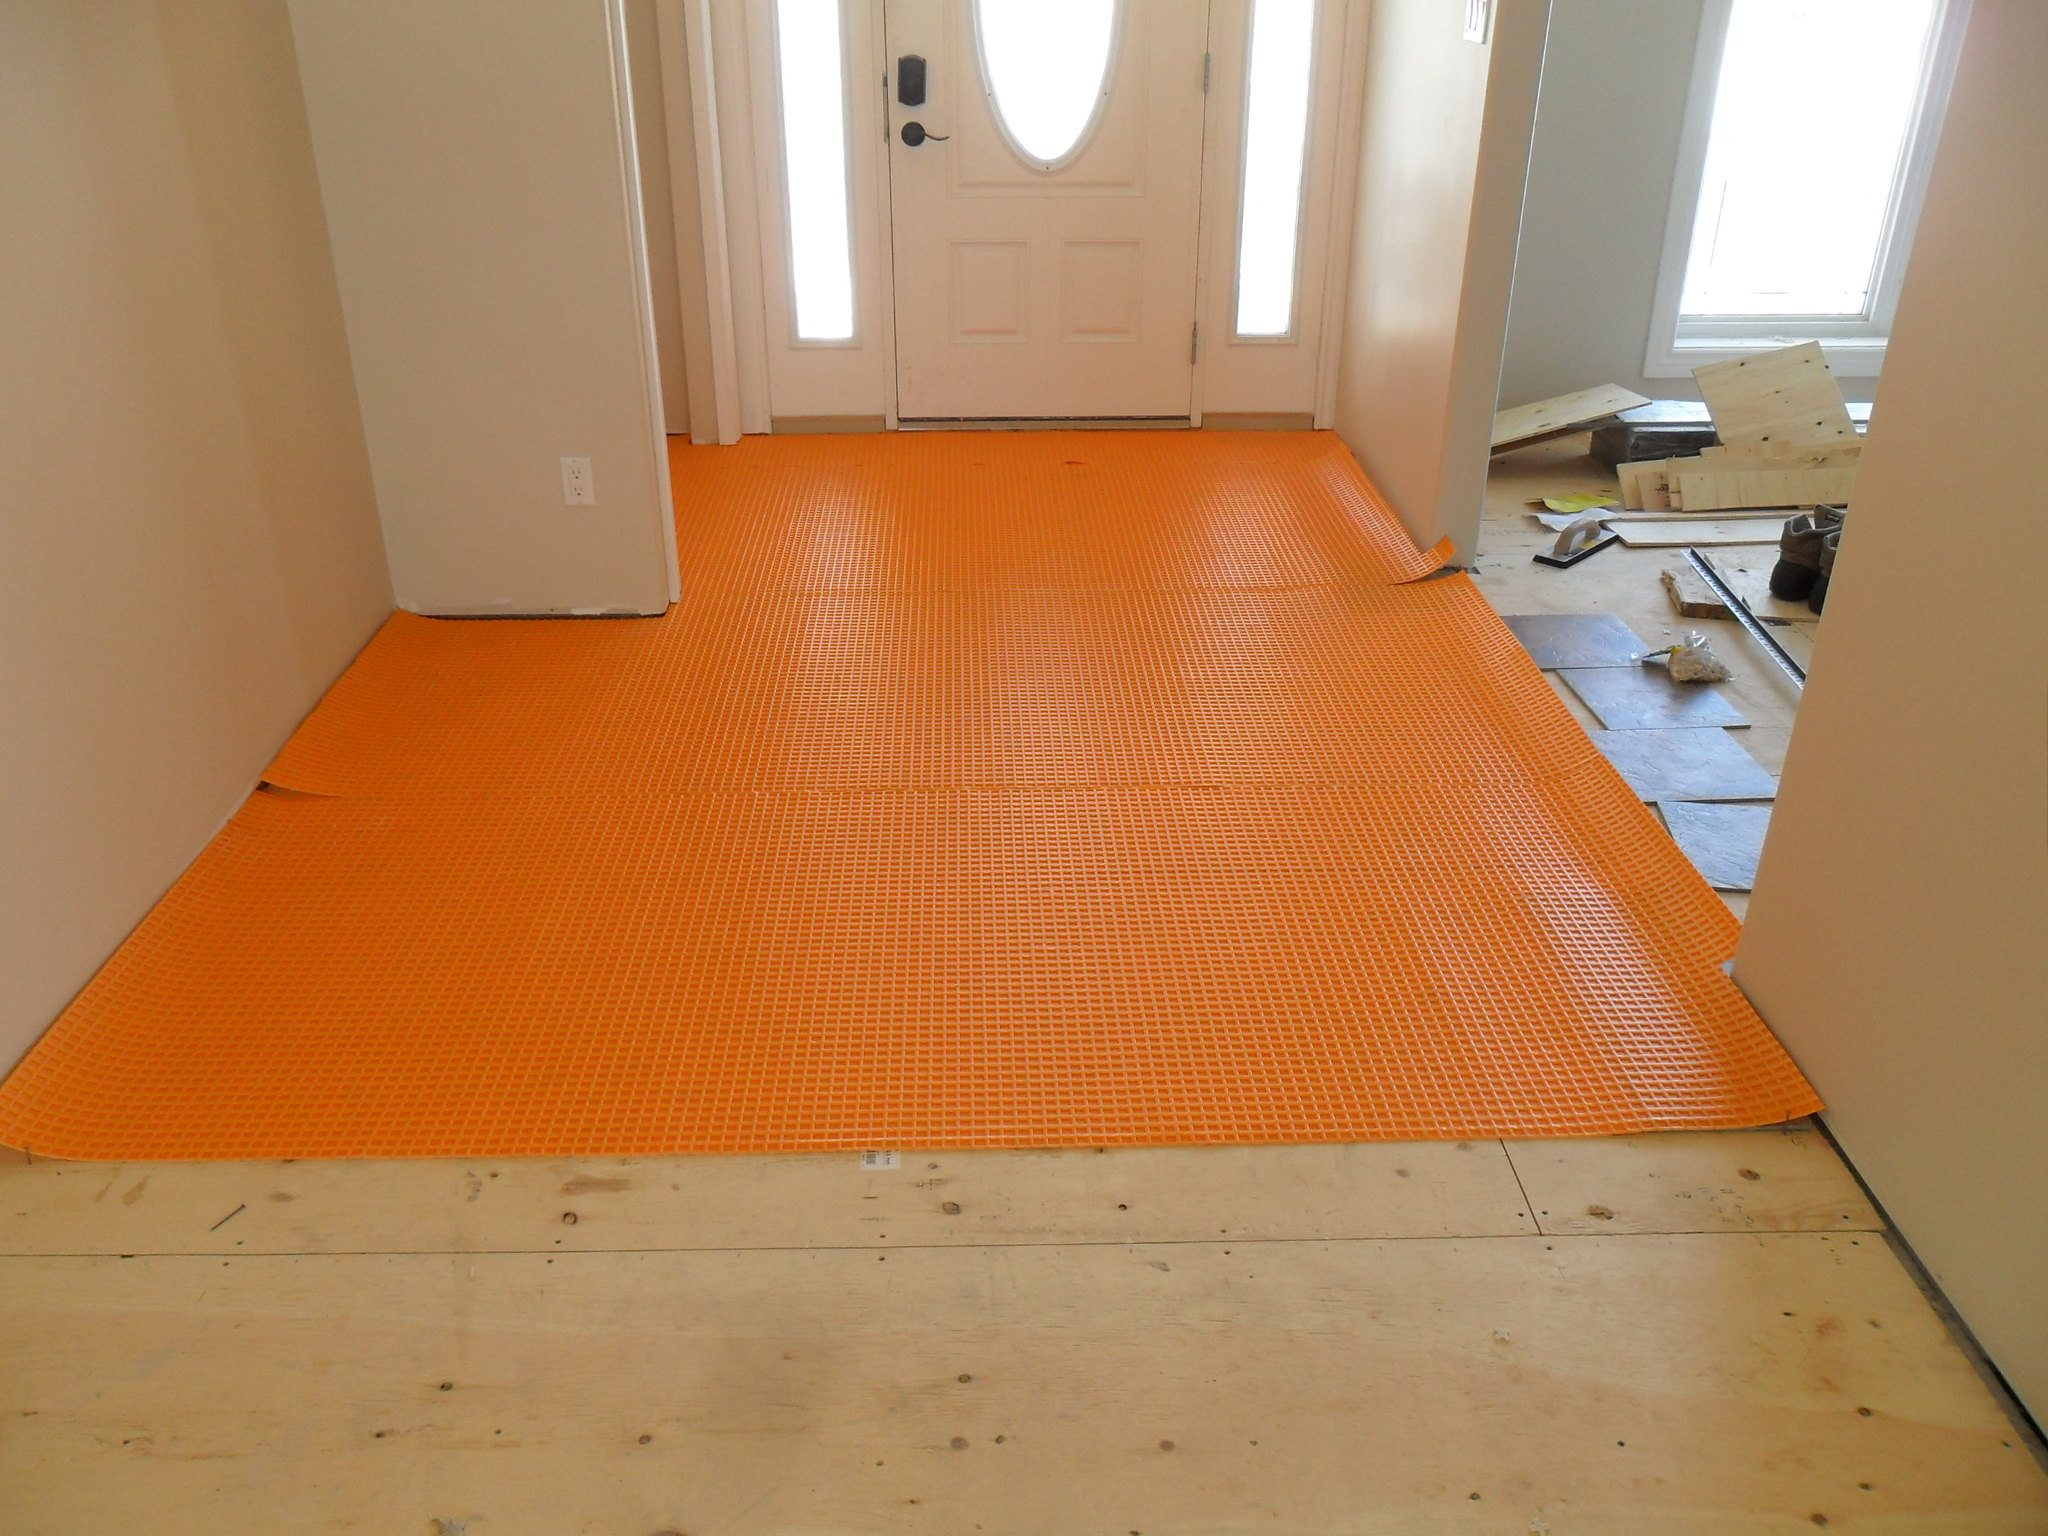 Ditra Over Plywood Theplywood Com, How To Tile Bathroom Floor Over Plywood